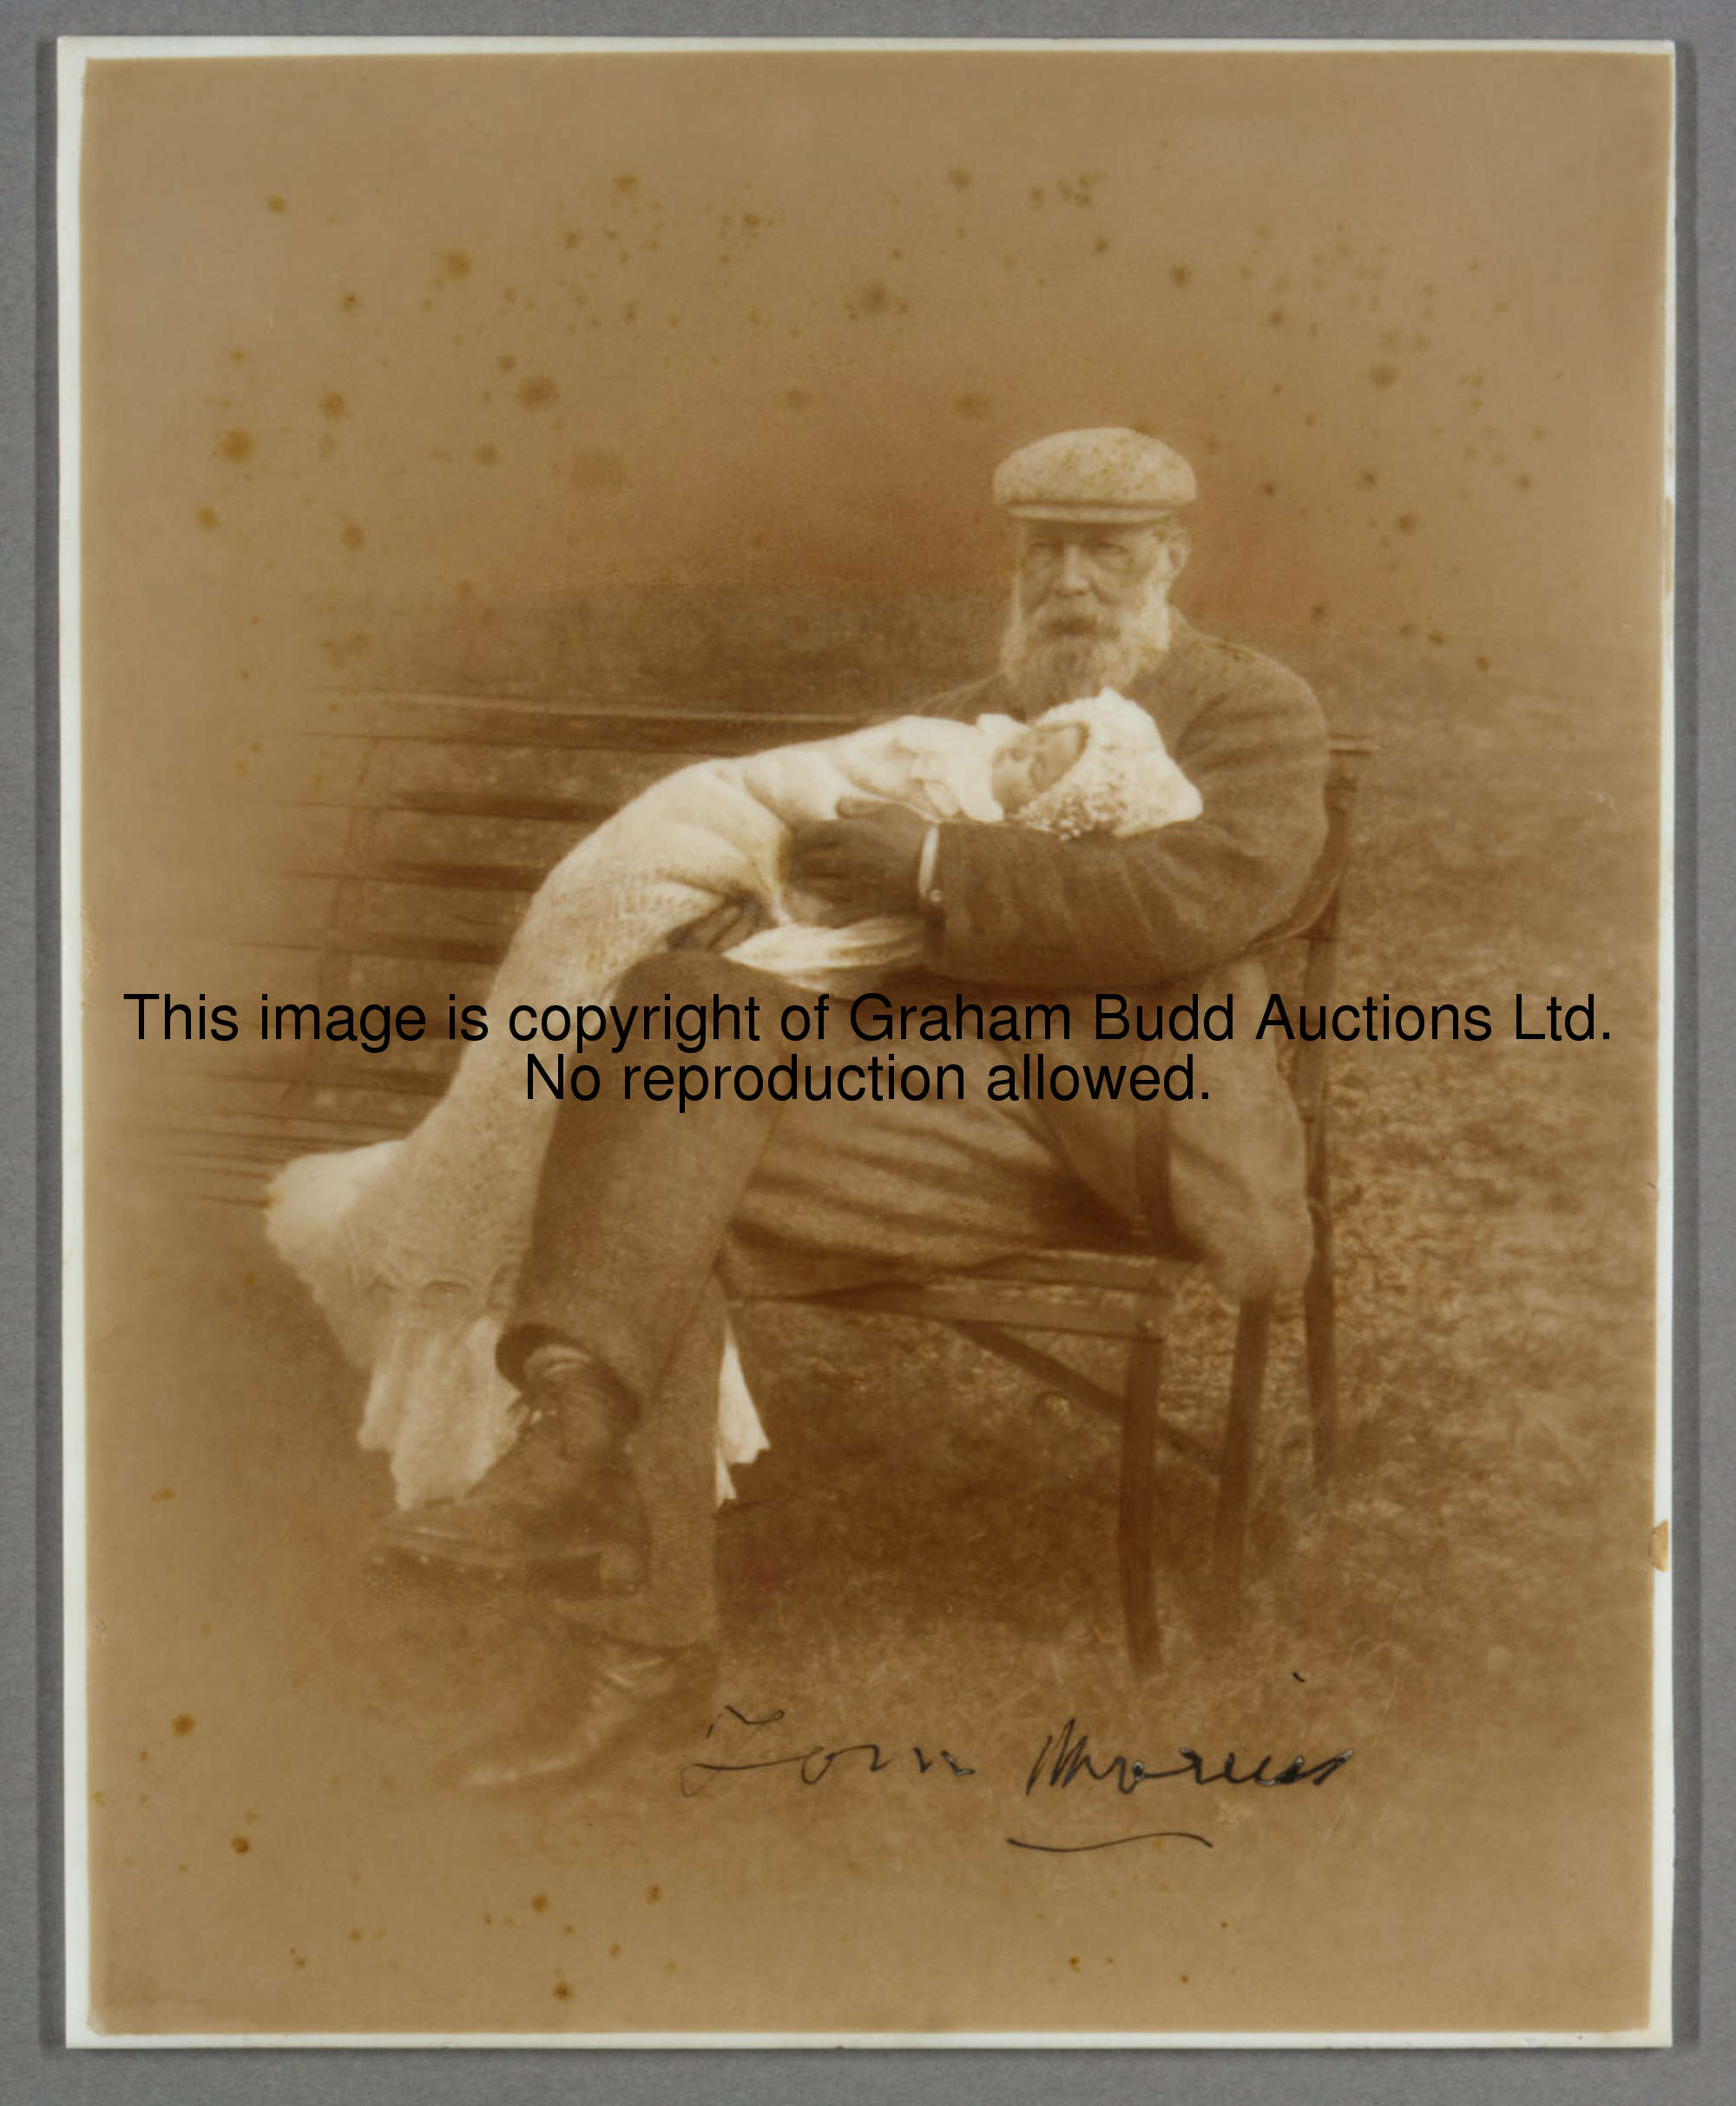 A rare signed photographic glass plate portraying Tom Morris cradling a baby in his arms, signed in ...